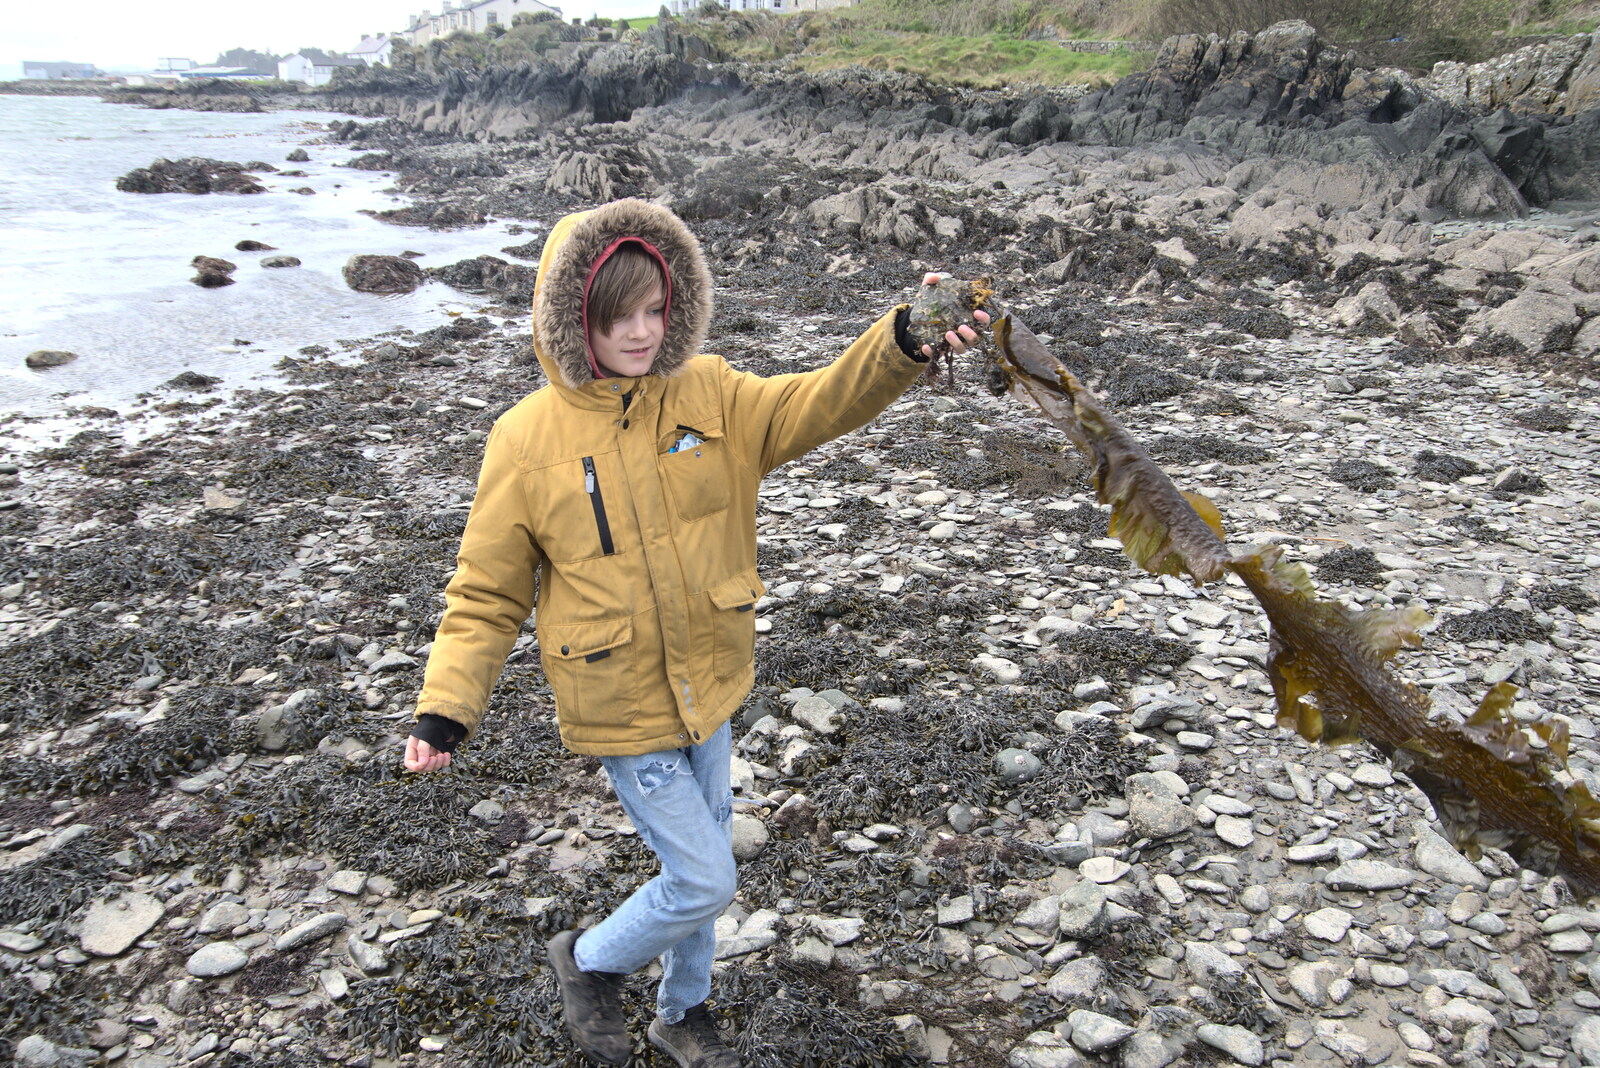 Greencastle, Doagh and Malin Head, County Donegal, Ireland - 19th April 2022: Harry flings some seaweed around